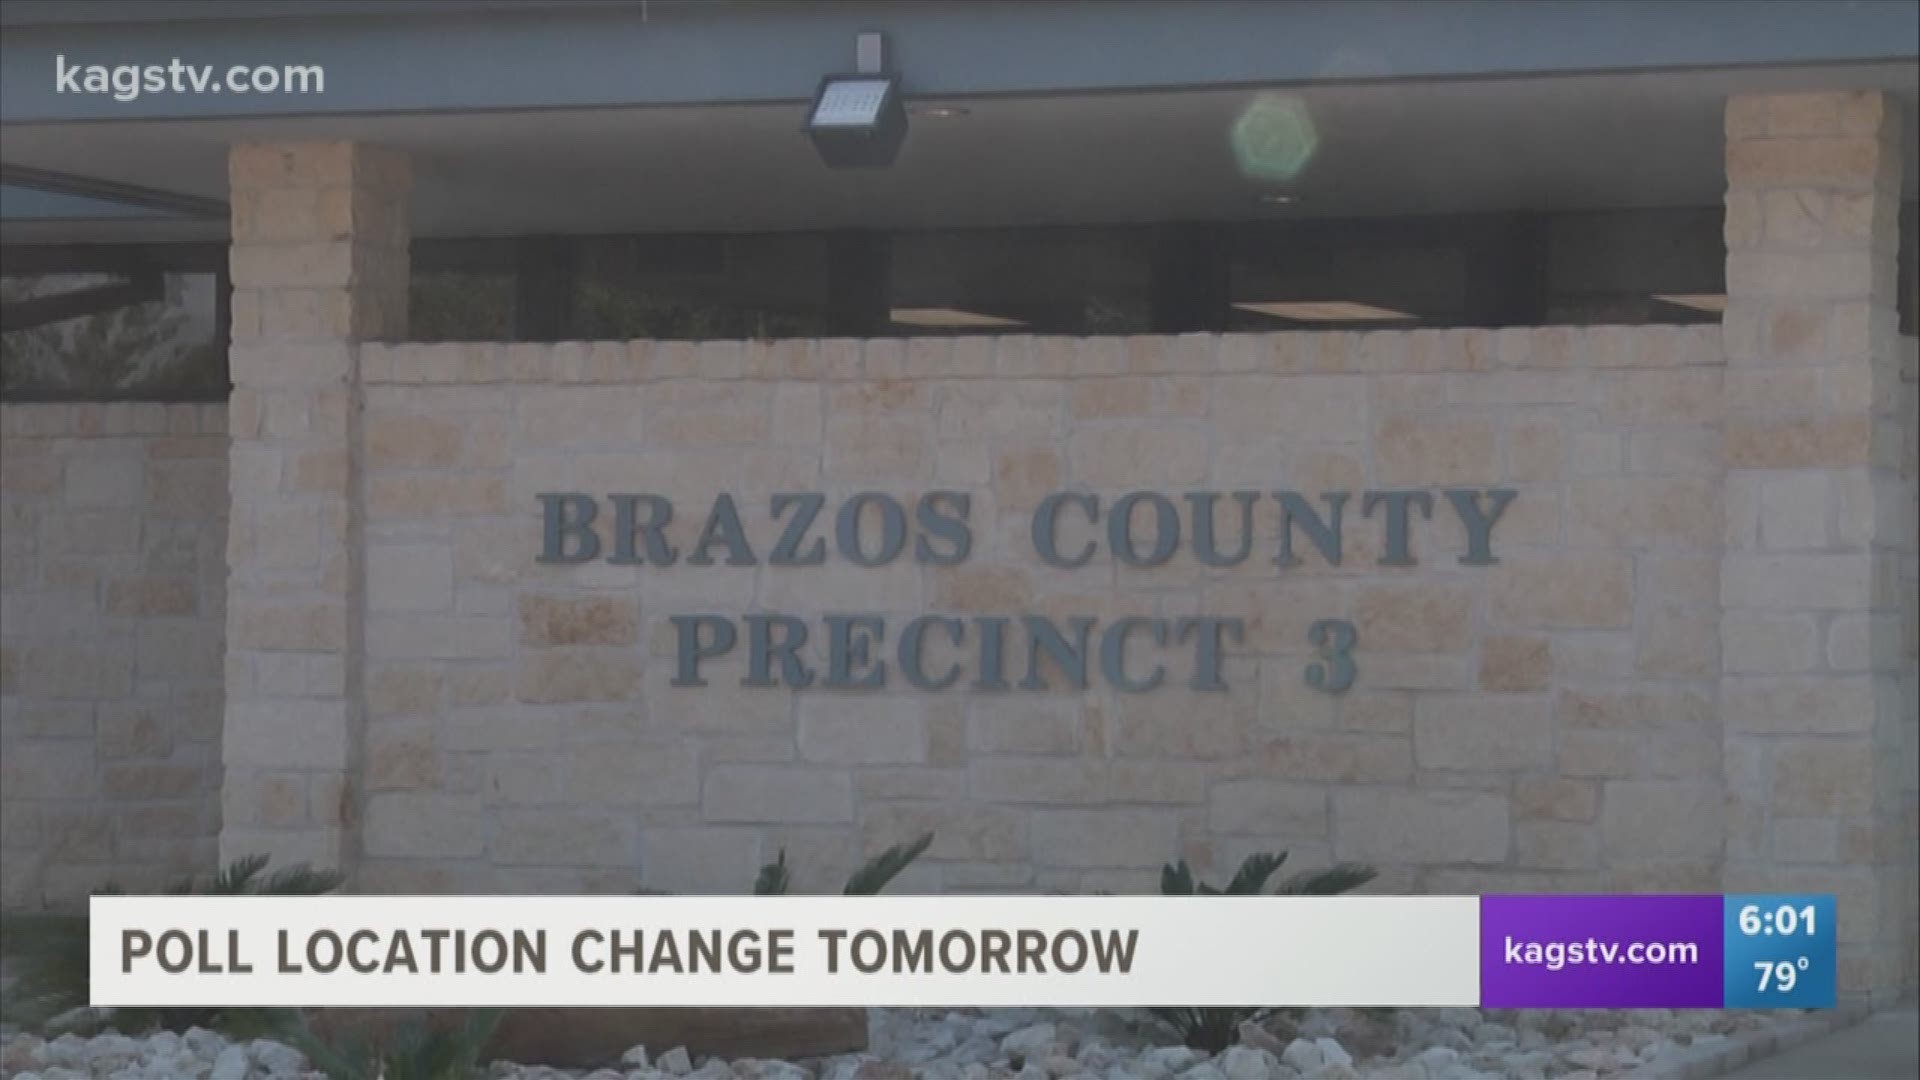 Tomorrow Brazos County will have over twenty voting centers open and you may vote at any center in the county.